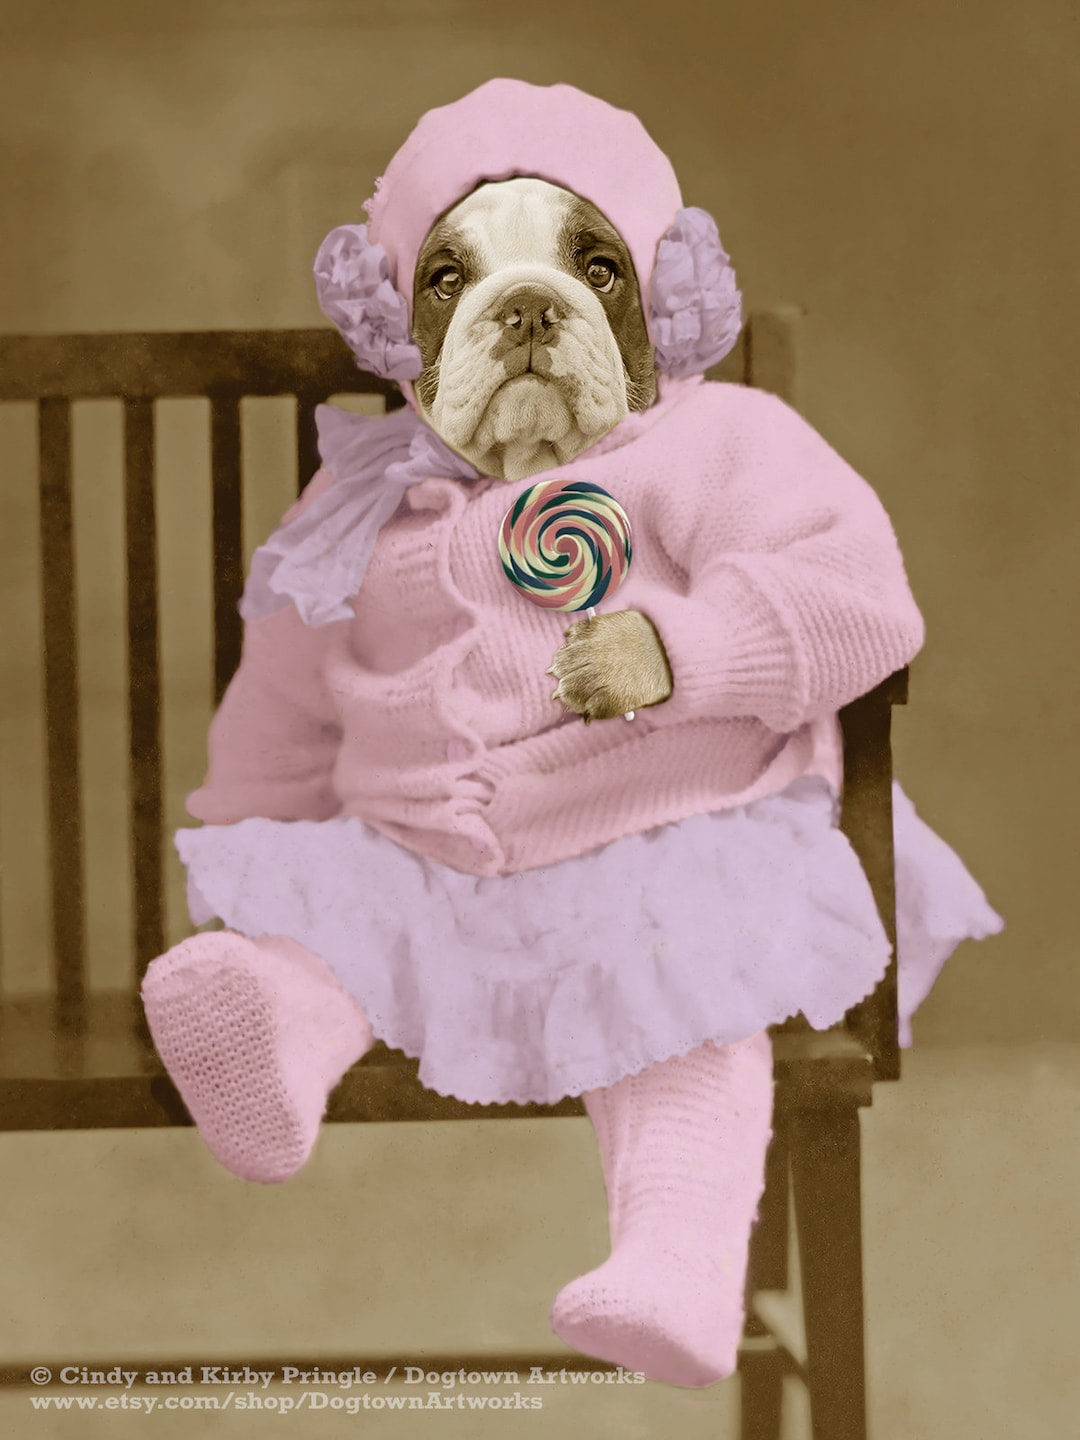 Bulldog Big Cook Xxx Video - Big Baby, Funny Large Original Photograph of a Cute, Adorable English  Bulldog Puppy Holding a Lollipop in Its Paw - Etsy Ireland